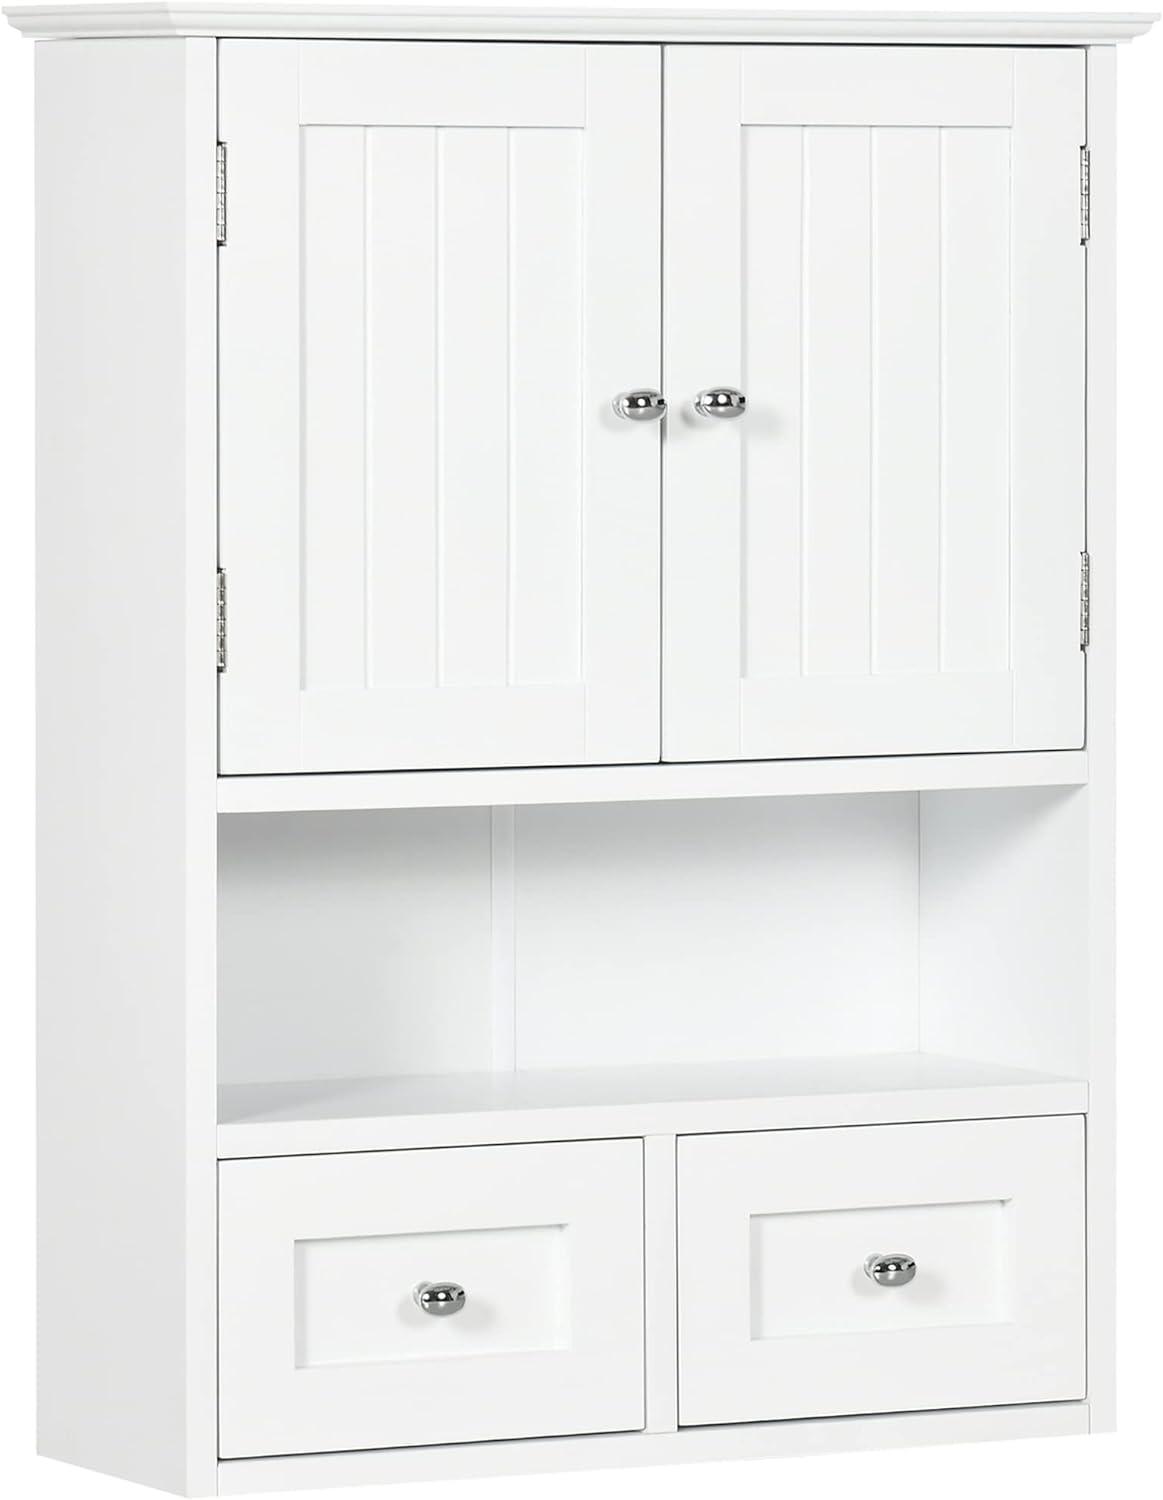 Sleek and Modern Bathroom Wall Cabinet with Ample Storage Space - Furniture4Design